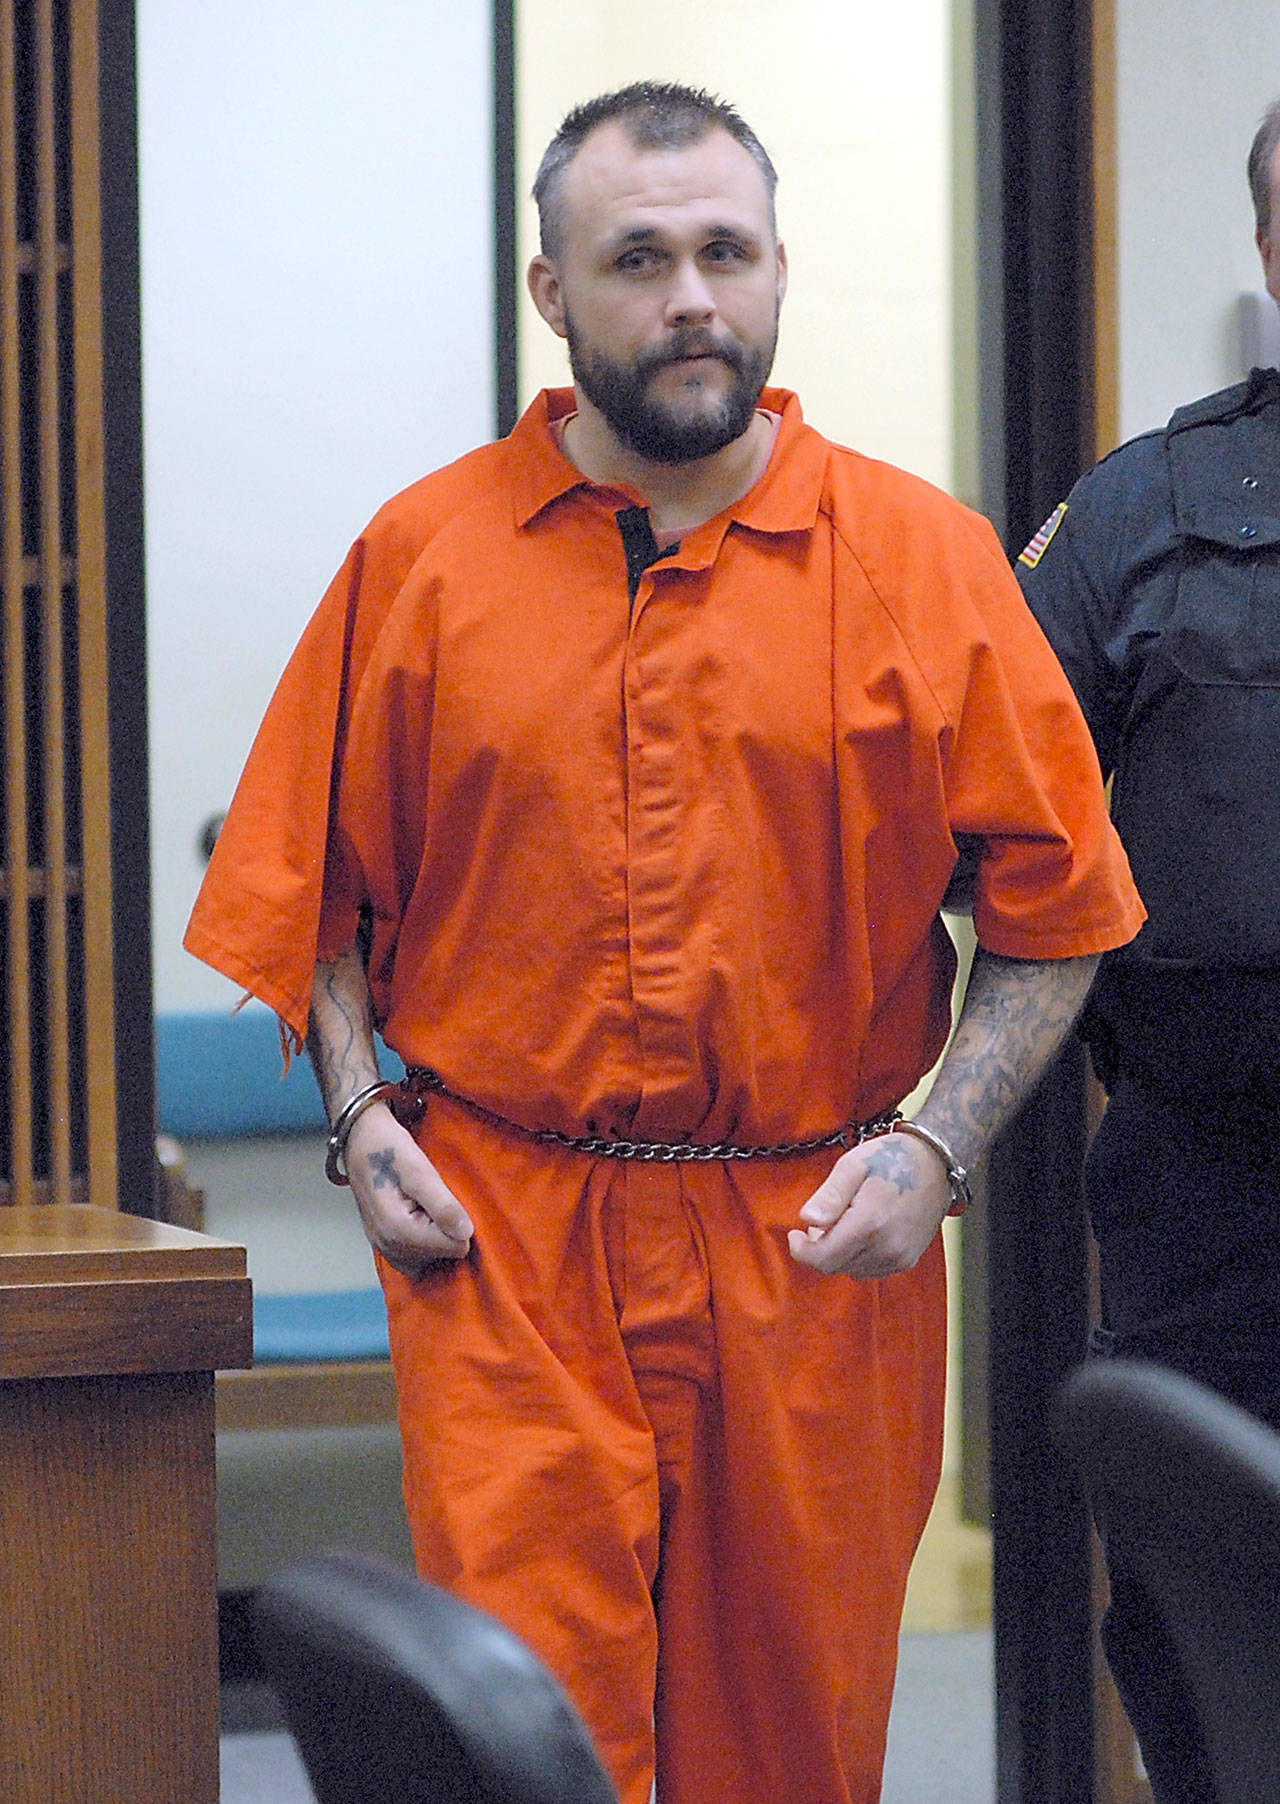 James Sweet enters Clallam County Superior Court on April 21 on a variety of charges in connection with an alleged shootout with Port Angeles police and Clallam County sheriff’s deputies on U.S. Highway 101 on May 28, 2016. (Keith Thorpe/Peninsula Daily News)